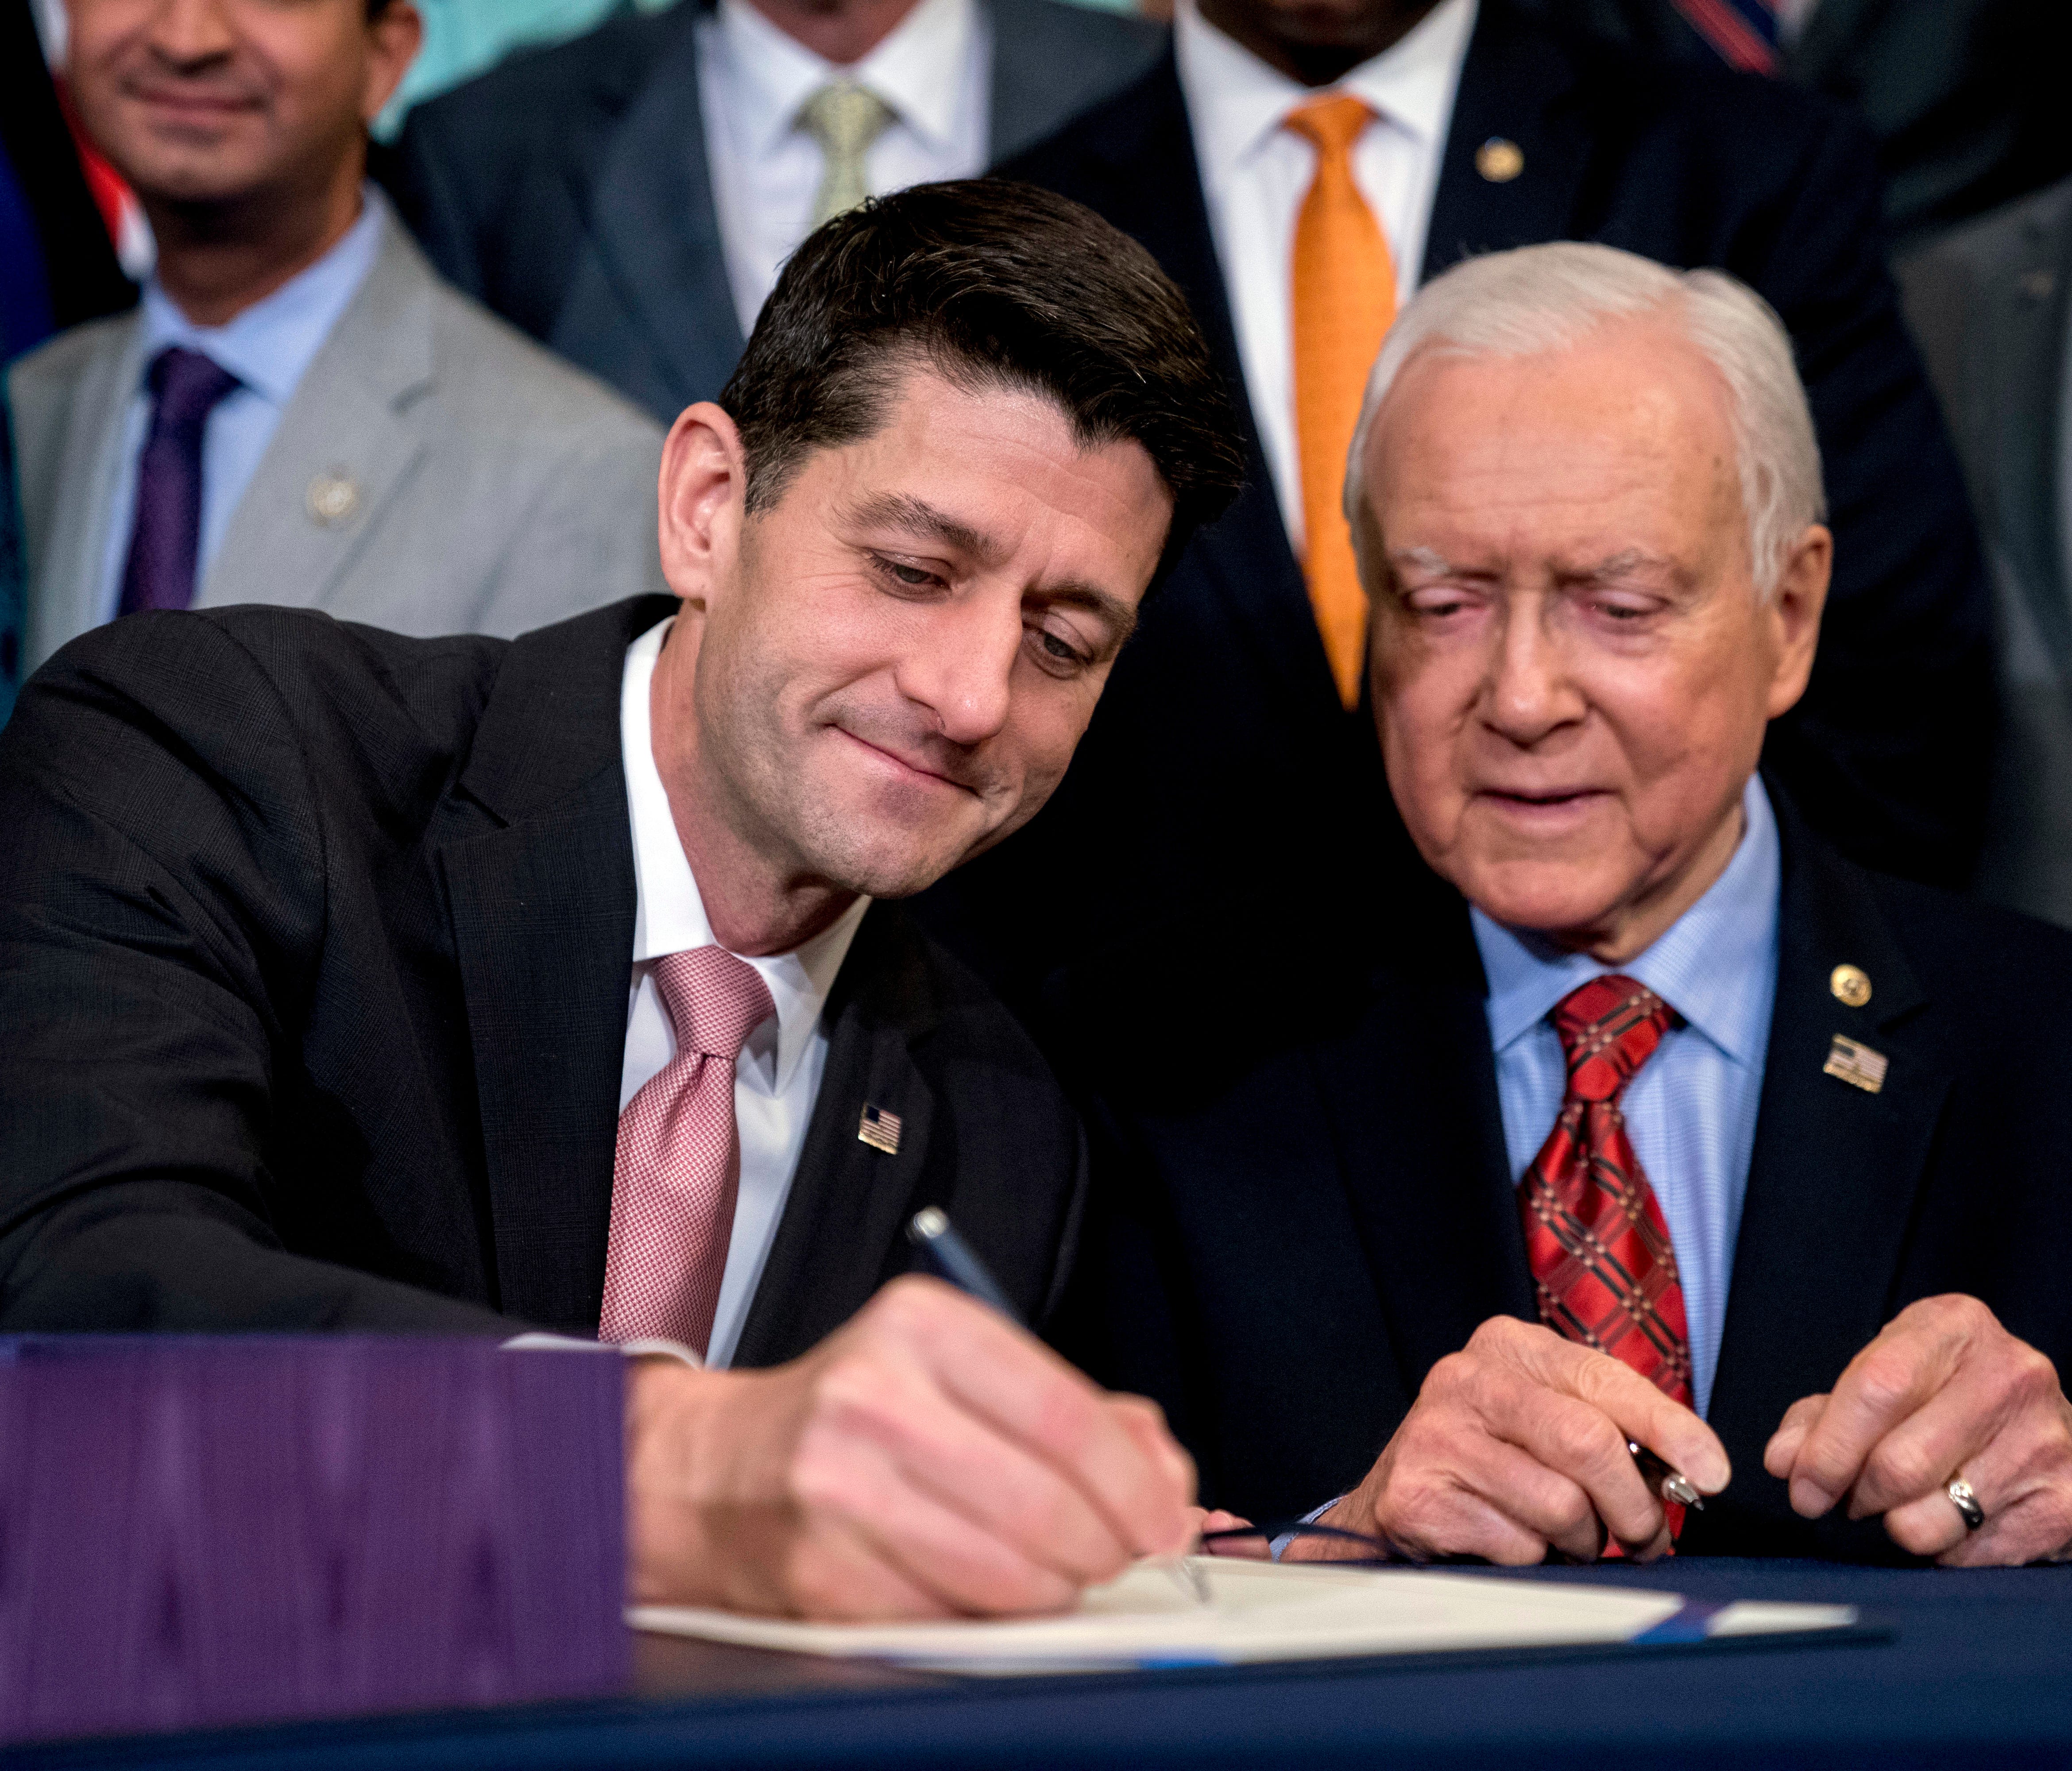 Speaker of the House Paul Ryan, R-Wis., center, accompanied by Senate Finance Committee Chairman Orrin Hatch, R-Utah, right, signs the final version of the GOP tax bill during an enrollment ceremony at the Capitol in Washington, Thursday, Dec. 21, 20